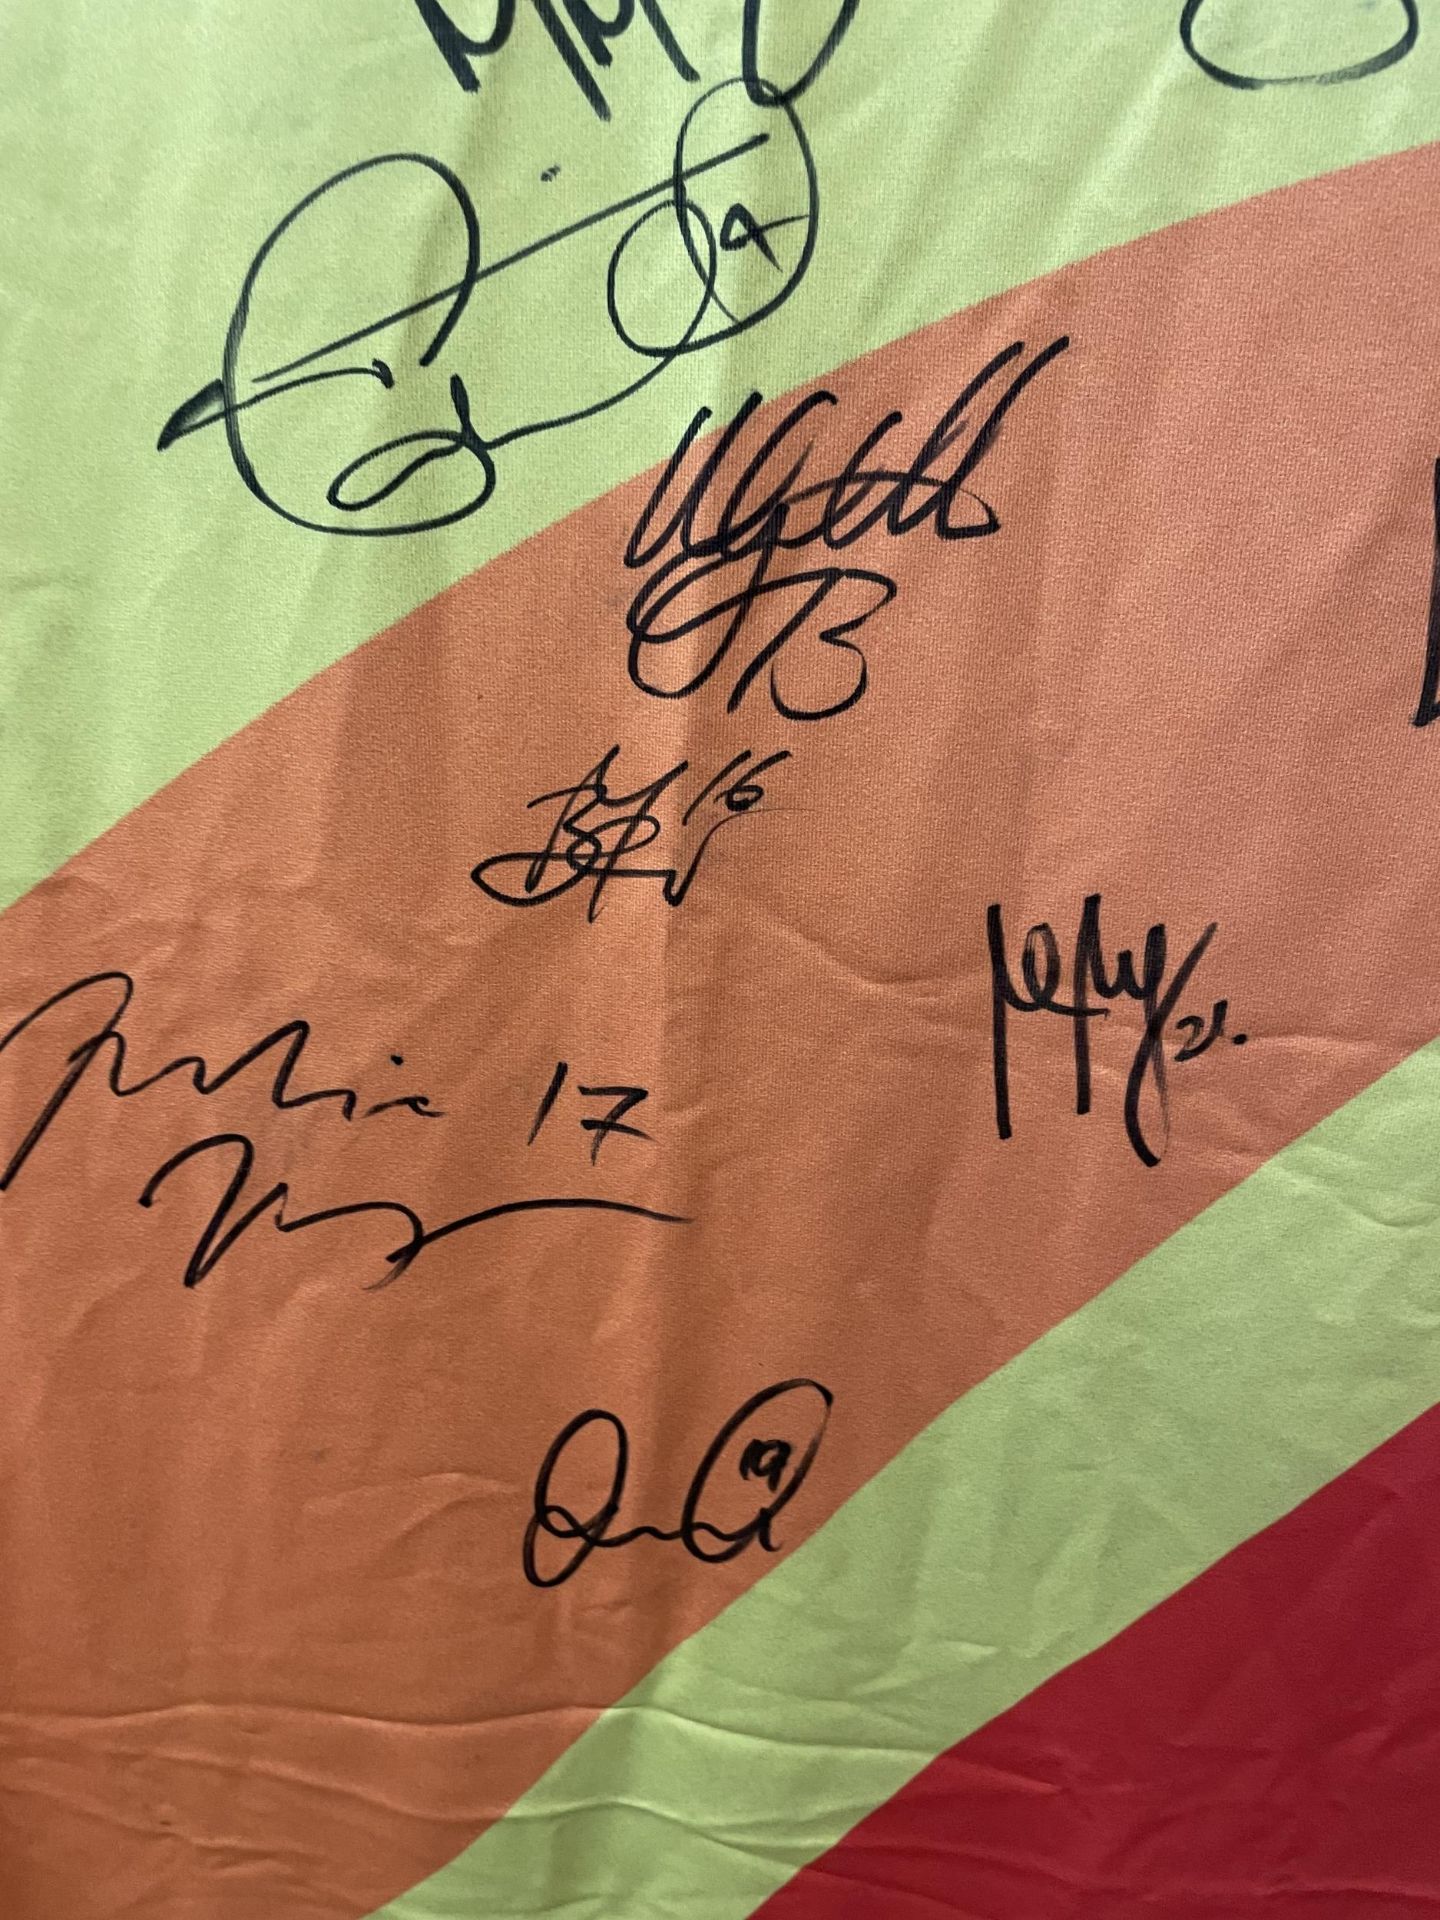 A FIFA WORLD CUP 2006 GERMANY SIGNED FLAG - Image 6 of 8